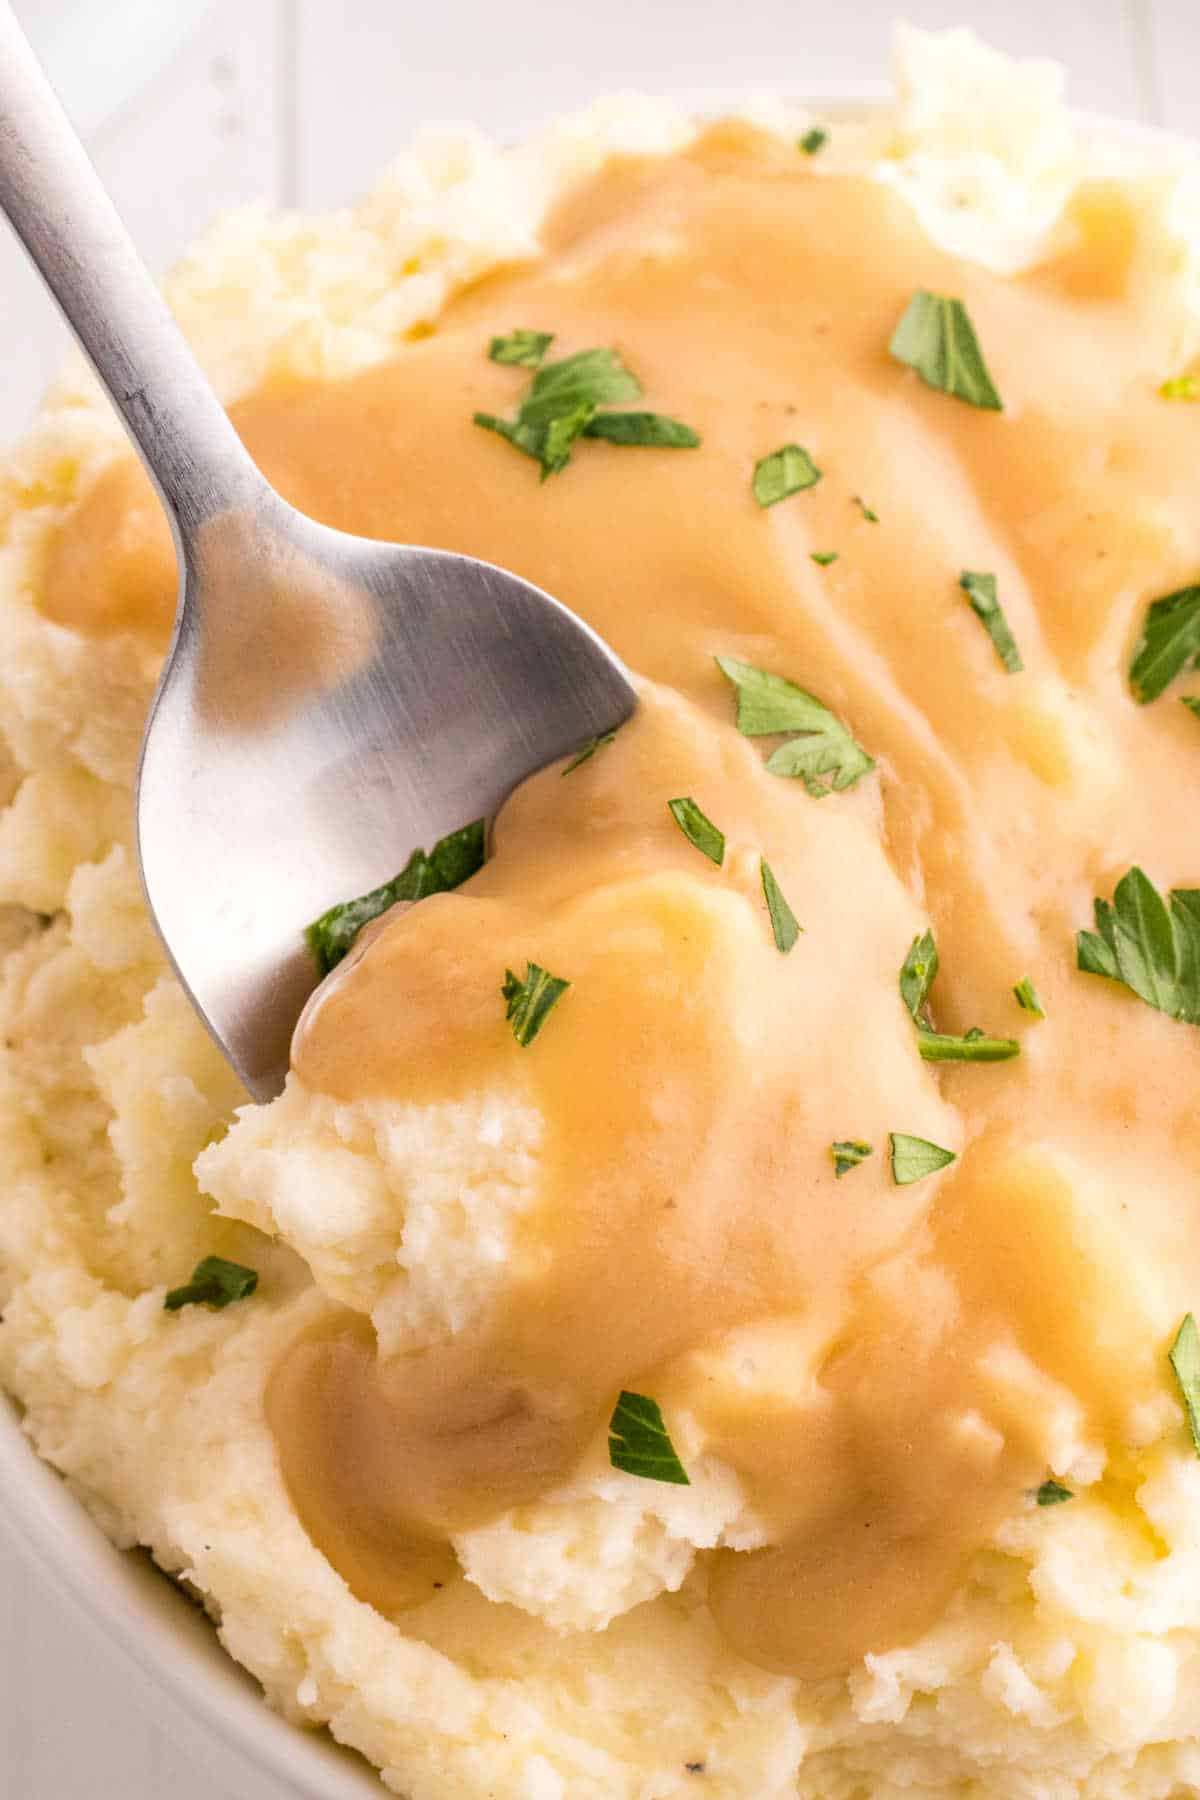 A serving spoon in a bowl of mashed potatoes topped with brown gravy.